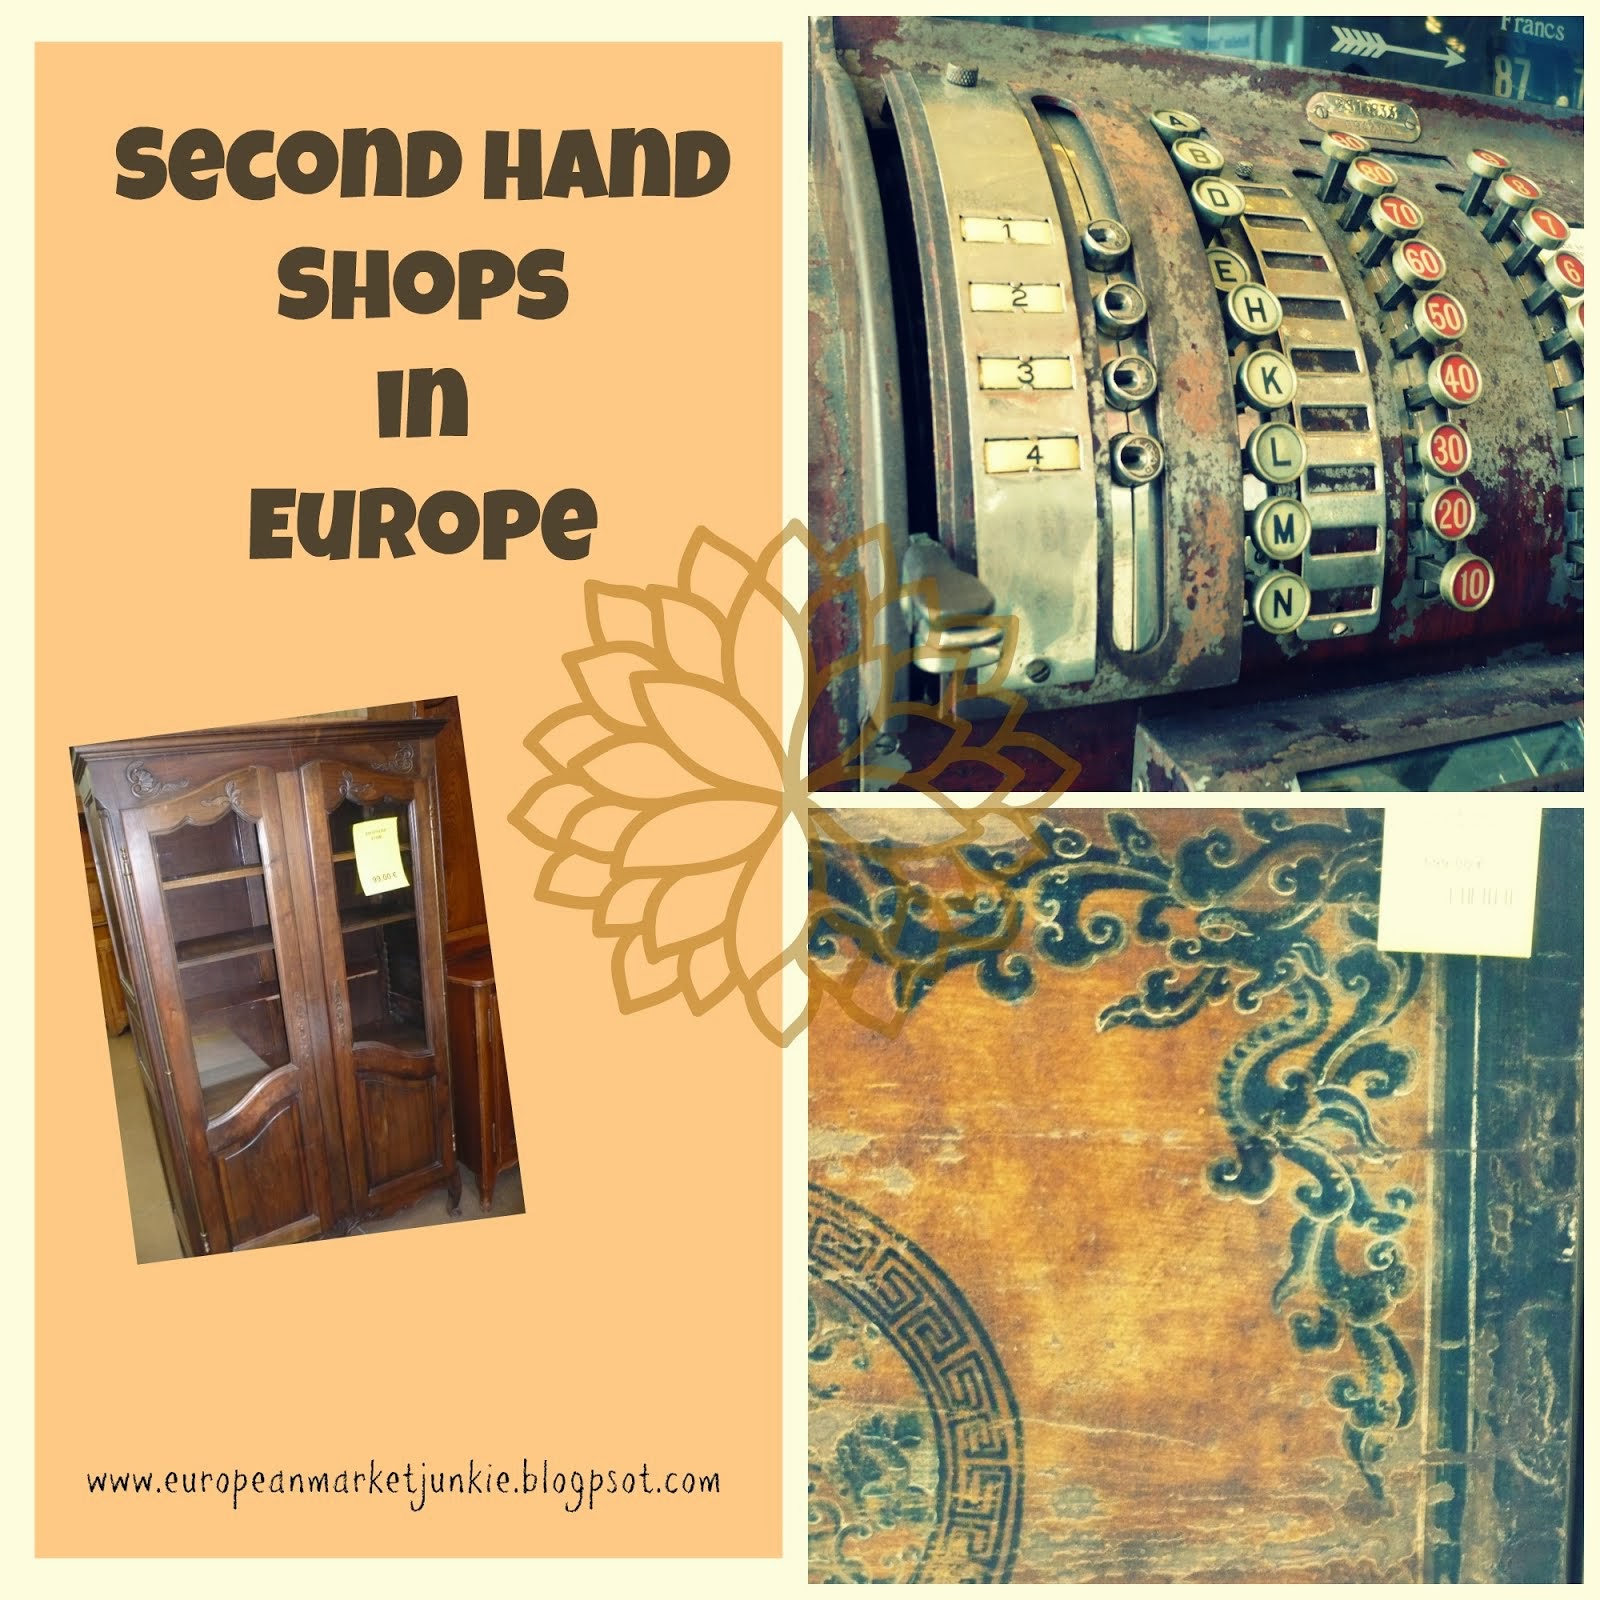 Visit the Second Hand Stores Below